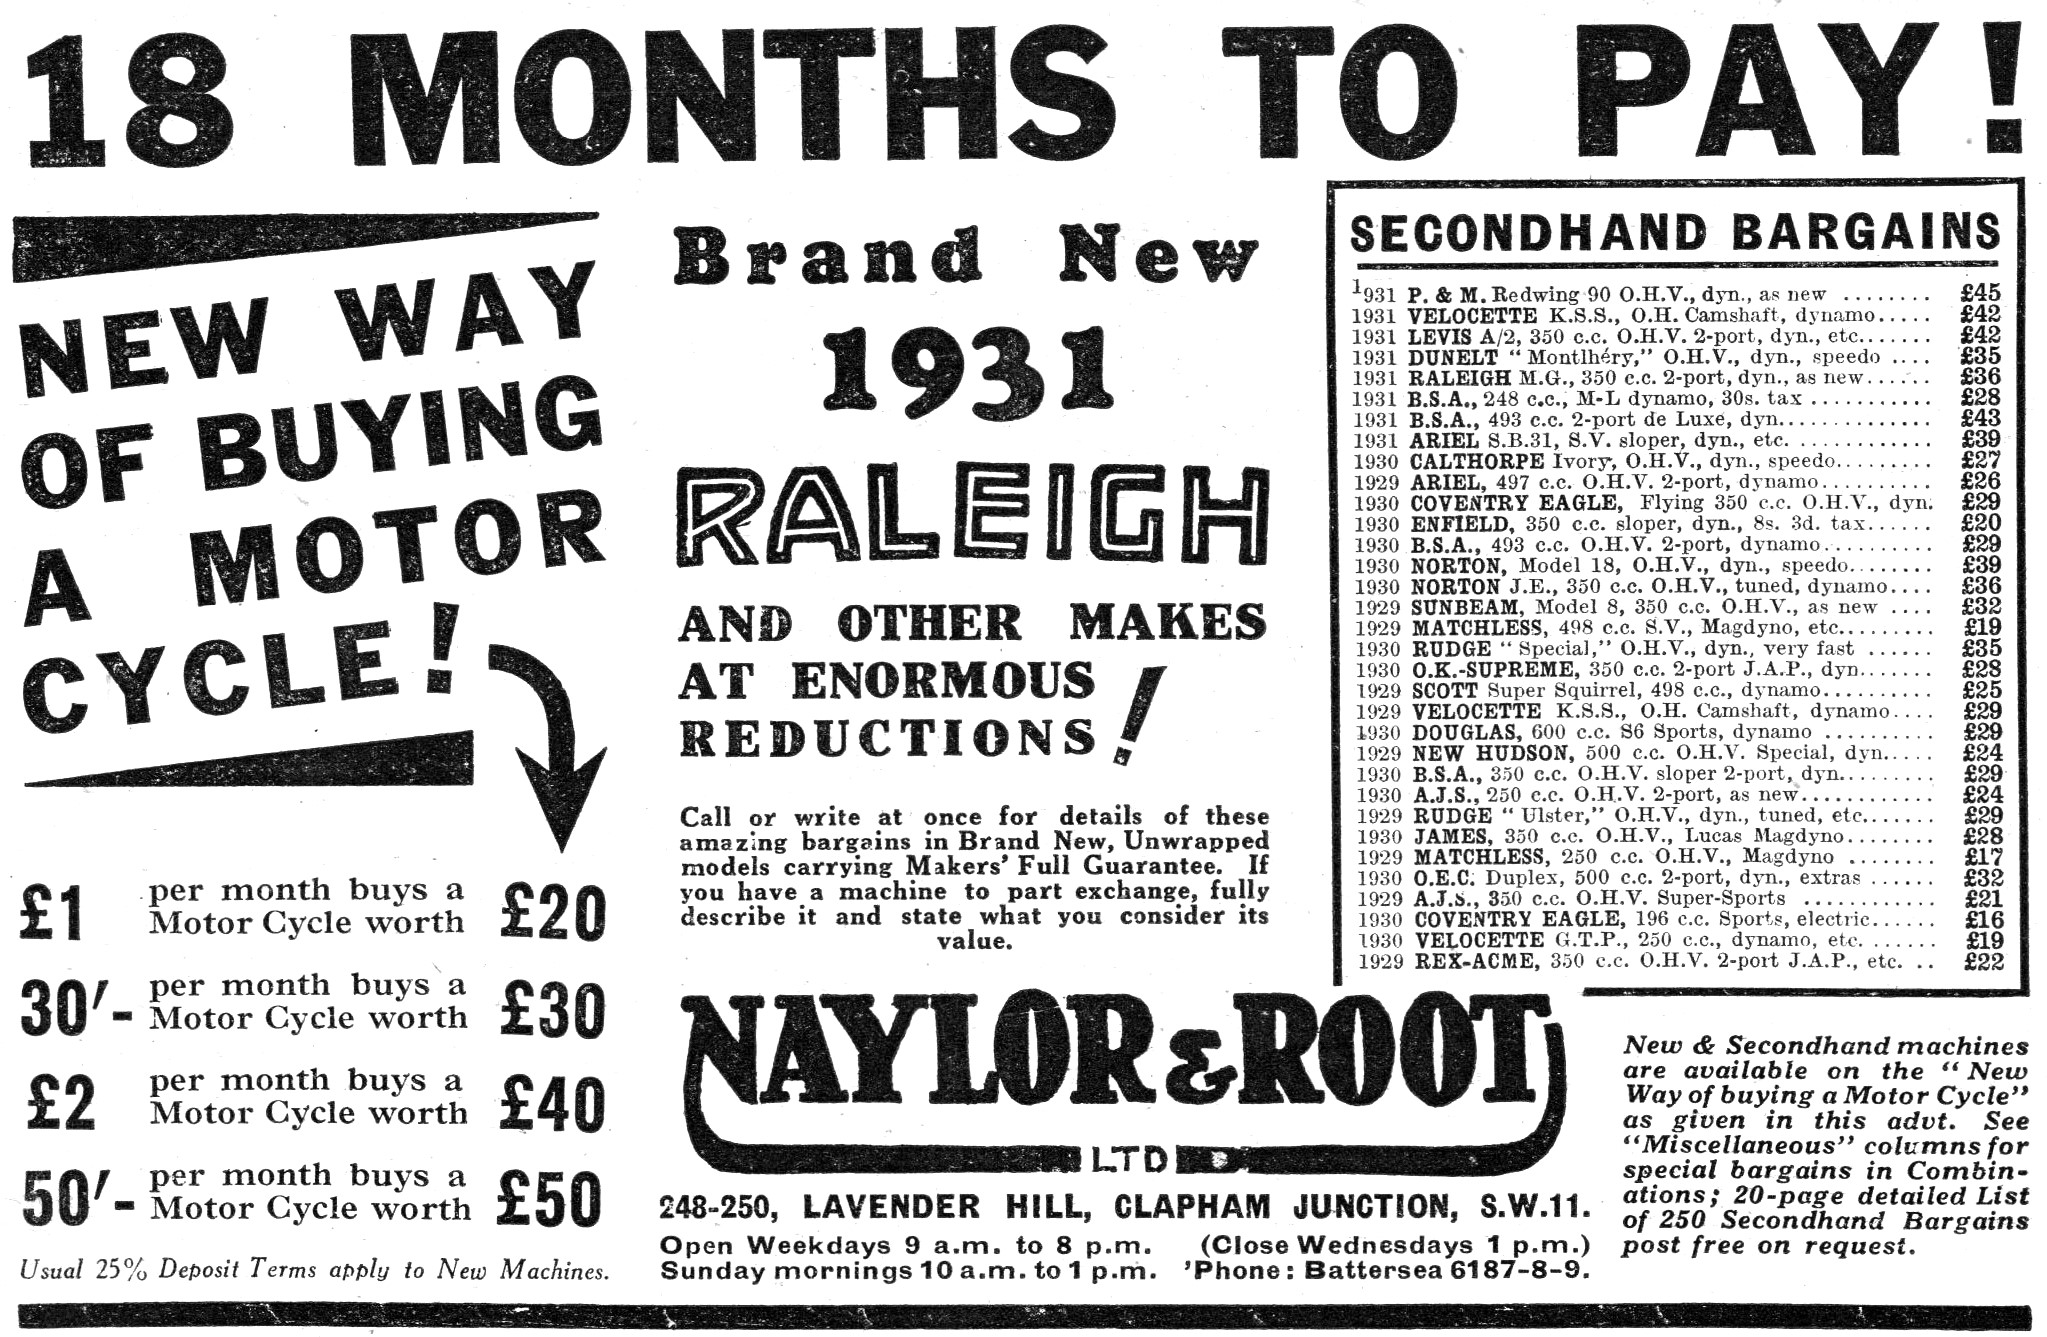 Naylor & Root Motor Cycle Sales. Clapham Junction 1931 Advert.   